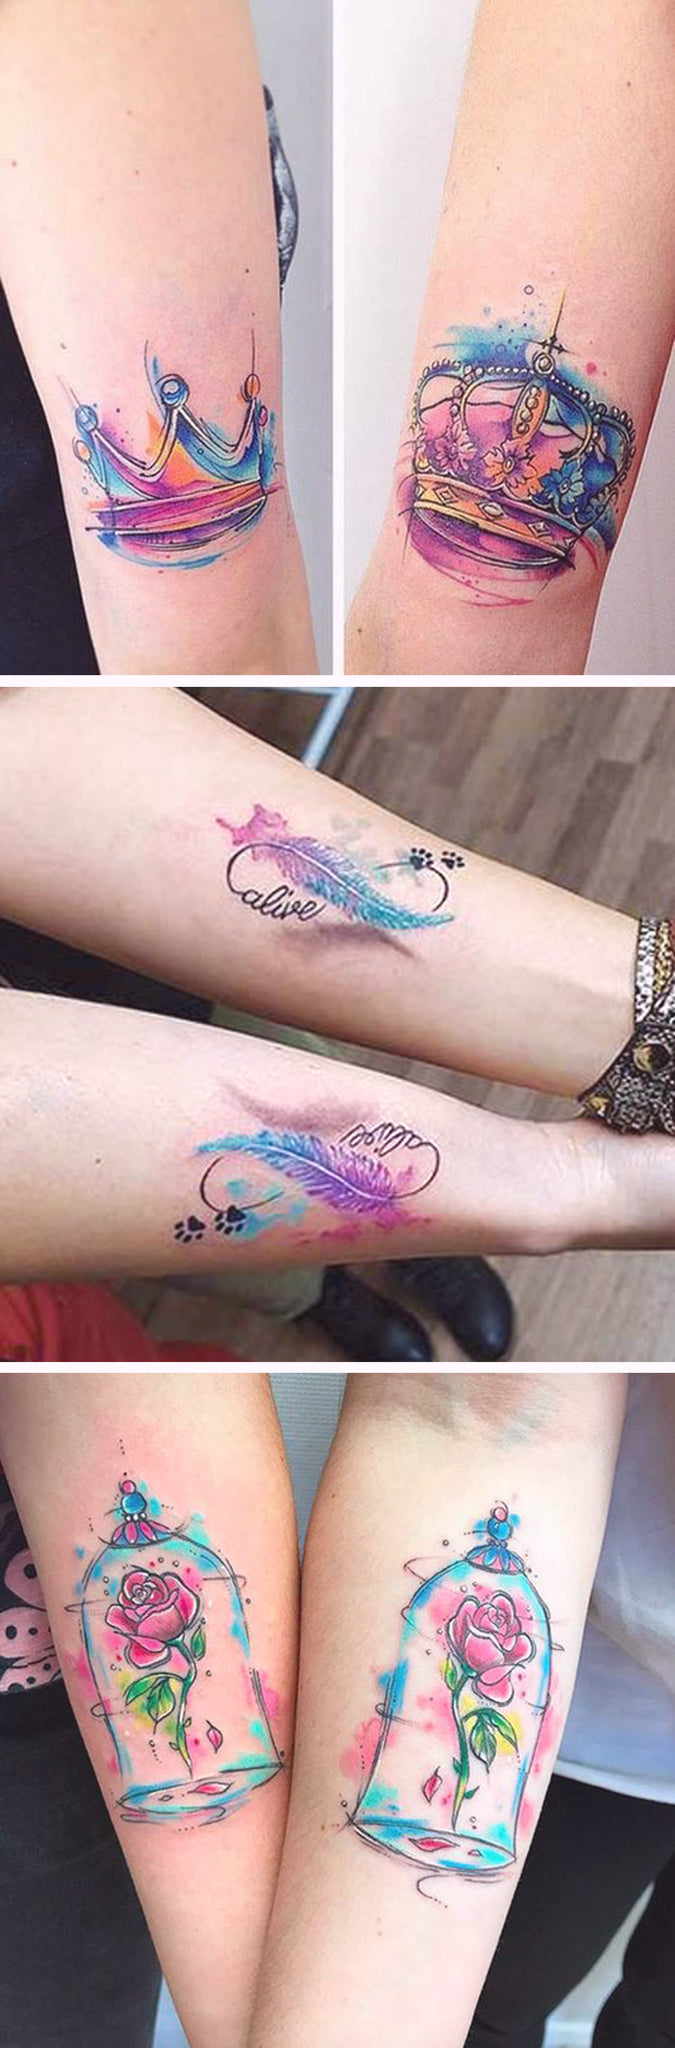 Matching Watercolor Tattoo Ideas for 2 Sisters, Bestfriends, Siblings - Small Arm Rose Floral Flower Tatouage - Queen King Crown Infinity Ideas Del Tatuaje - www.MyBodiArt.com